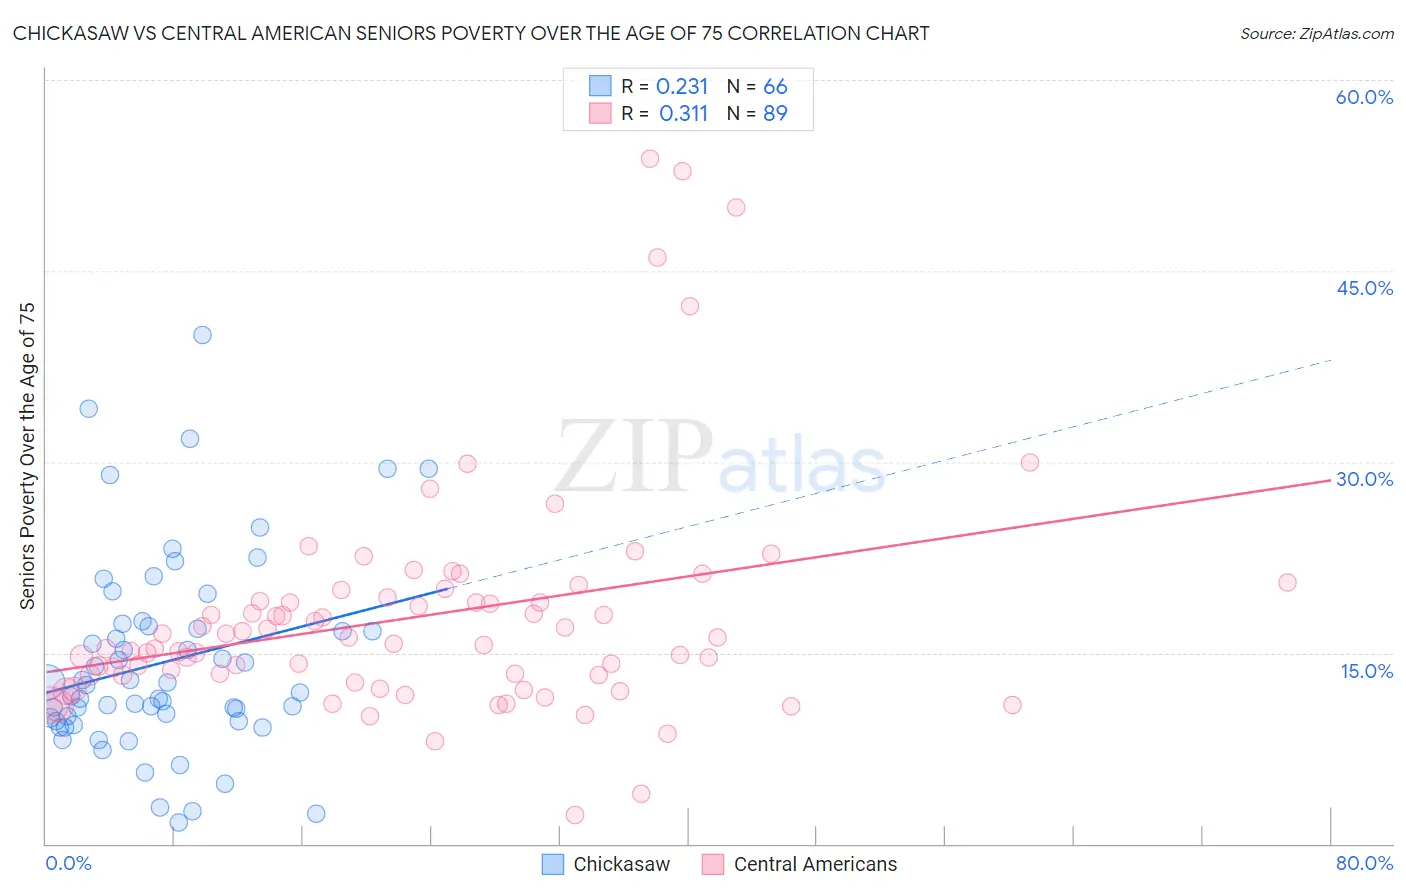 Chickasaw vs Central American Seniors Poverty Over the Age of 75